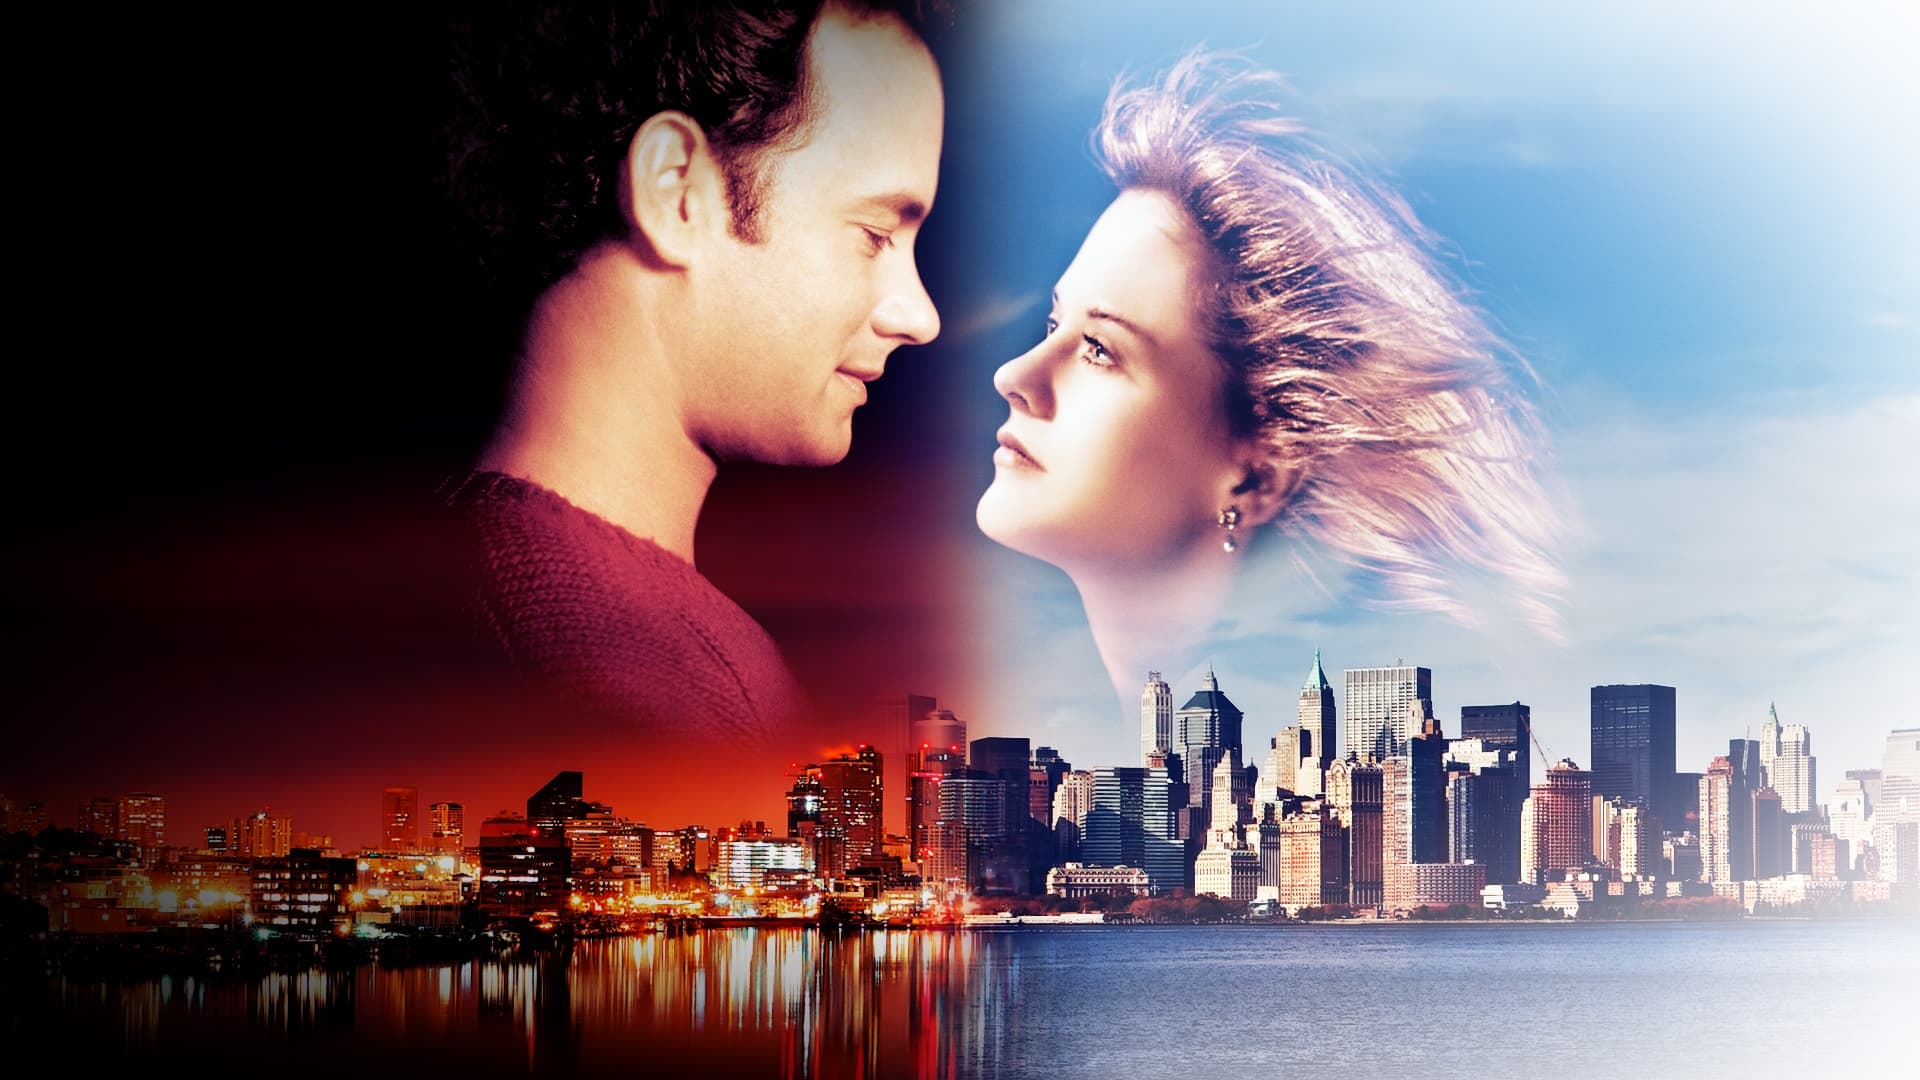 Poster Phim Không Ngủ Ở Seattle (Sleepless in Seattle)